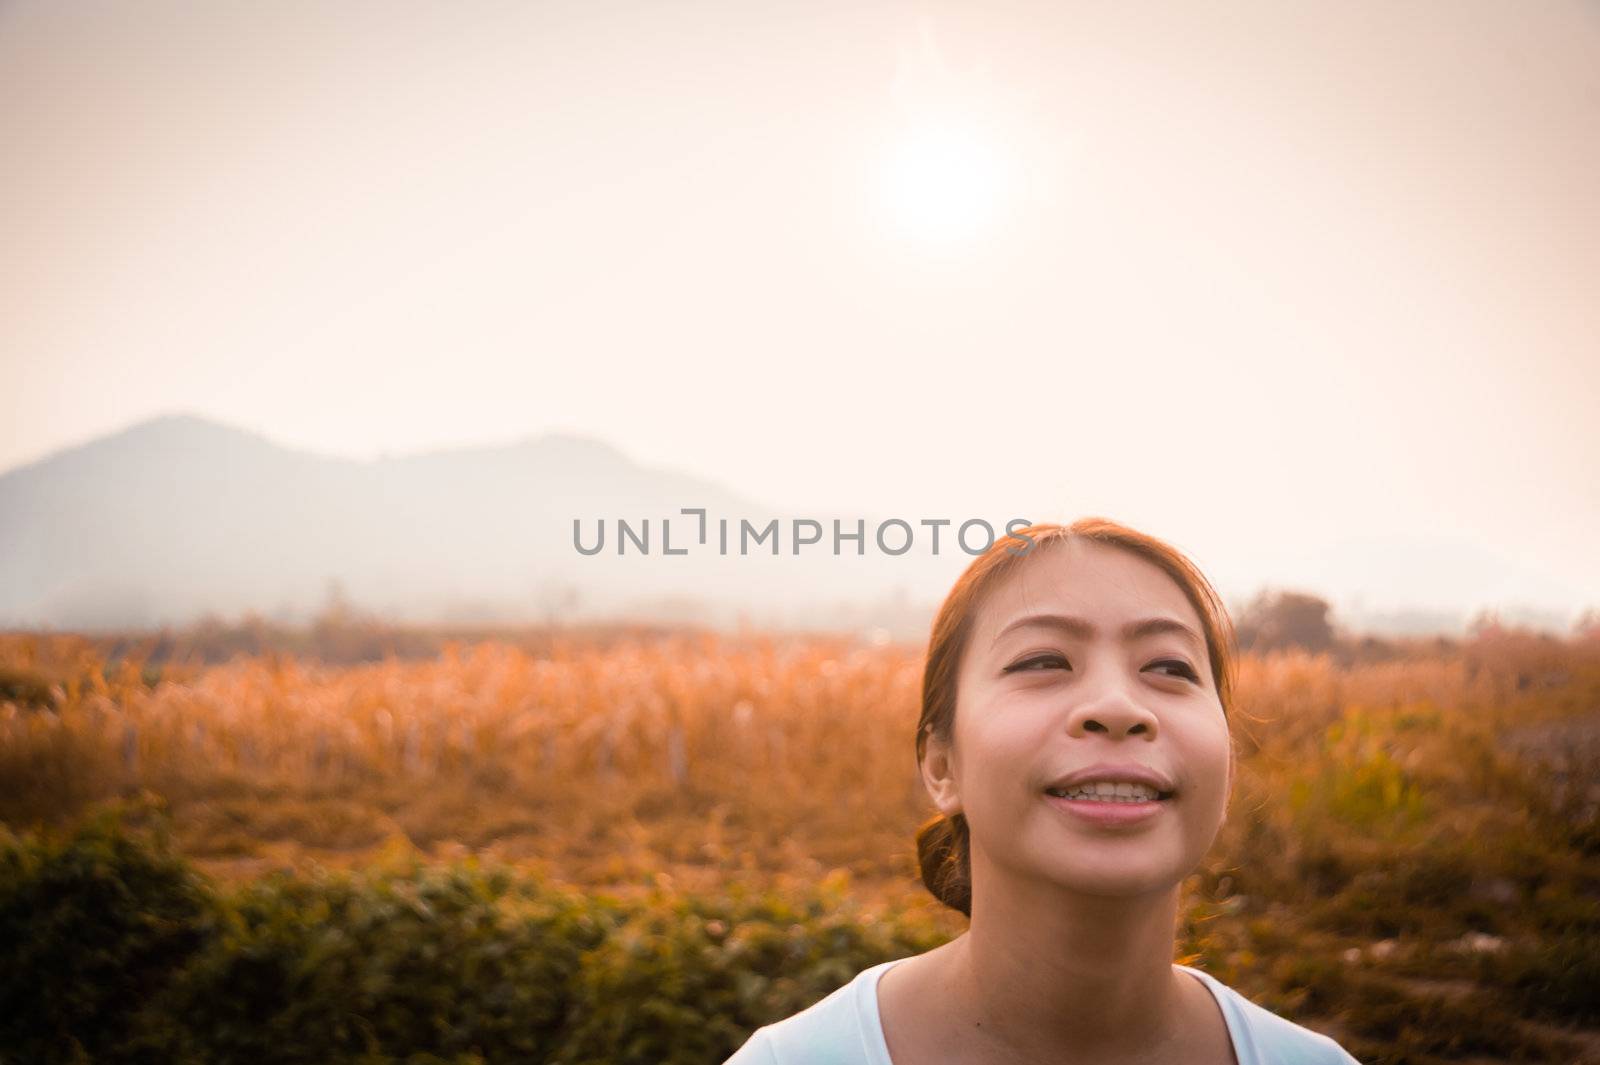 woman in field with sunlight by moggara12